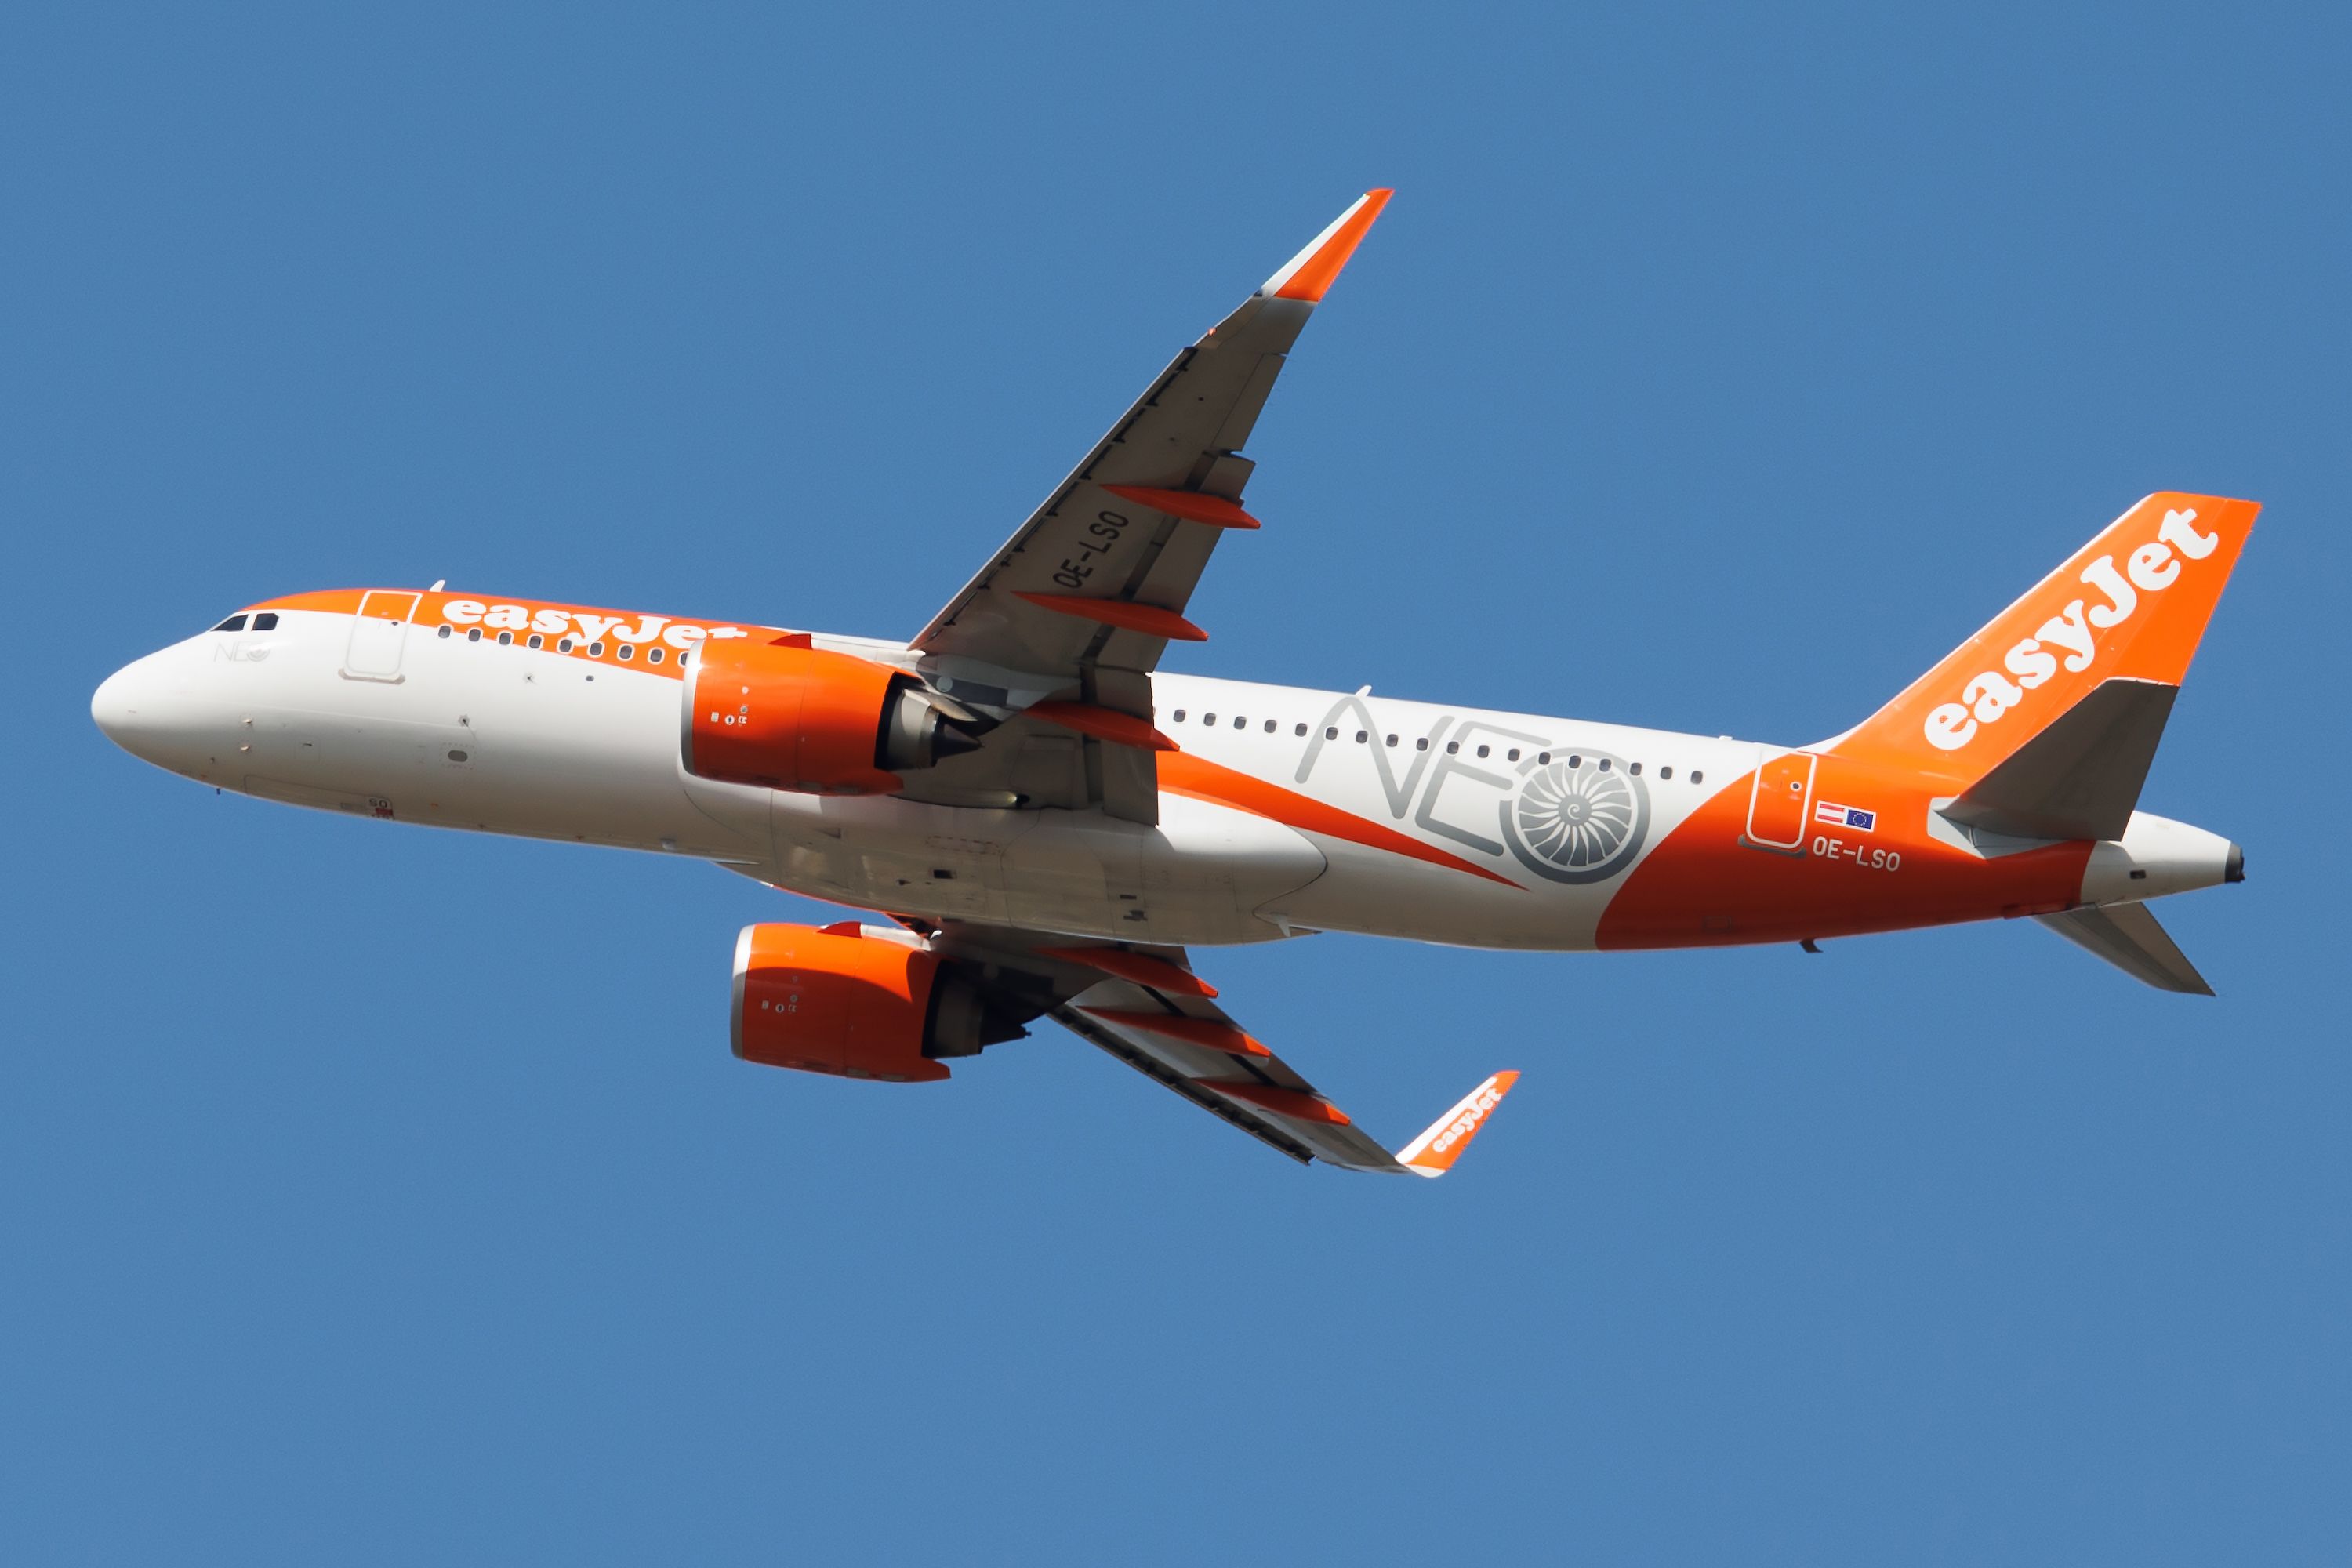 An easyJet Airbus A320neo Flying in the sky.